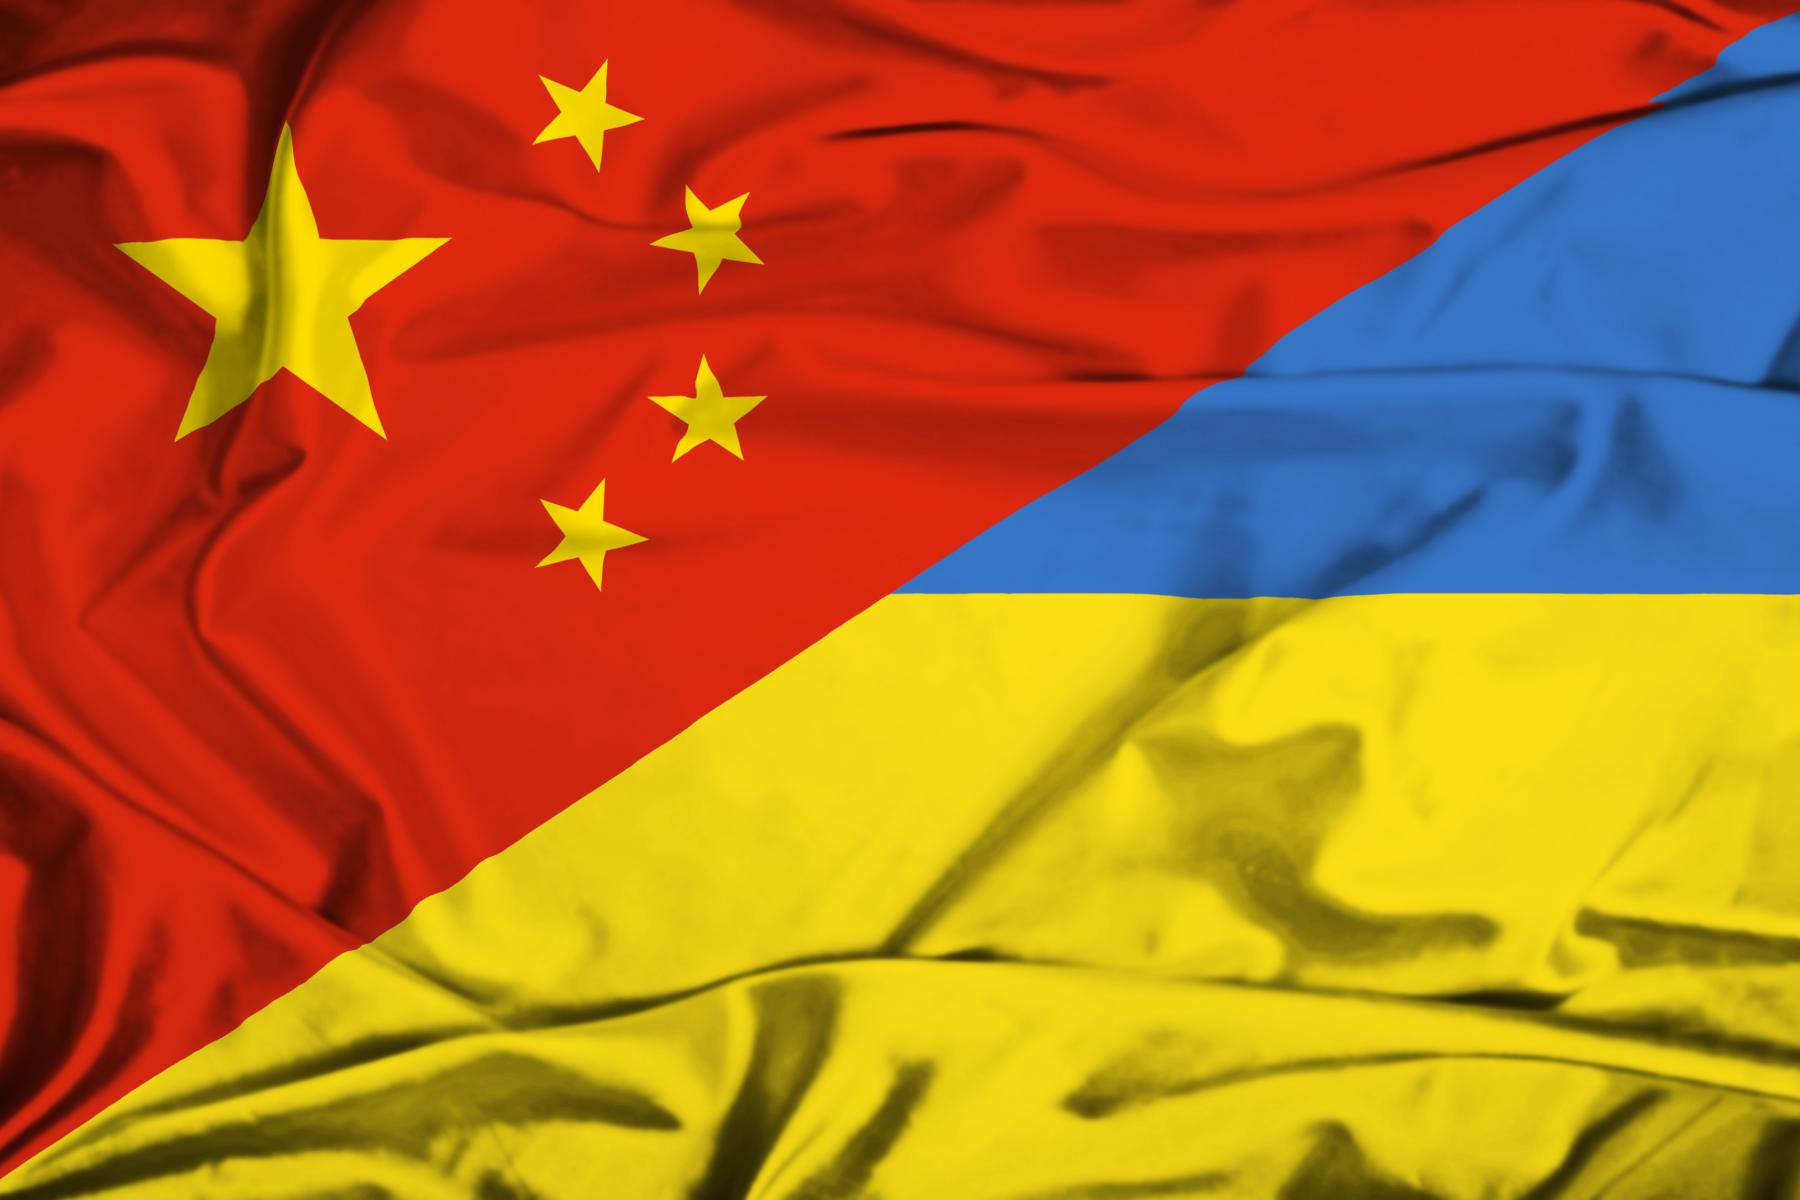 What Would China’s Mediation in the Ukraine Crisis Look Like?